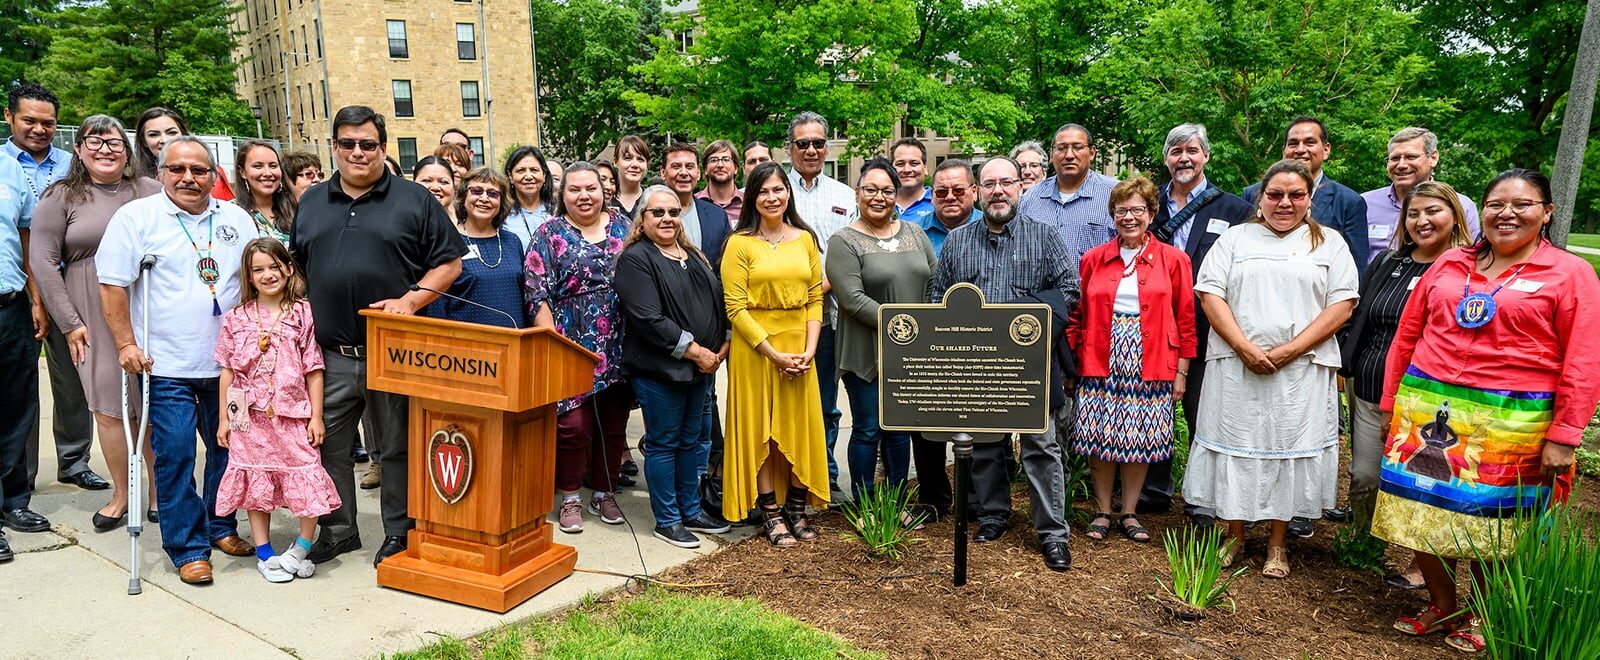 Members of the Ho-Chunk Nation are pictured during a heritage marker dedication ceremony for the "Our Shared Future" plaque on Bascom Hill.